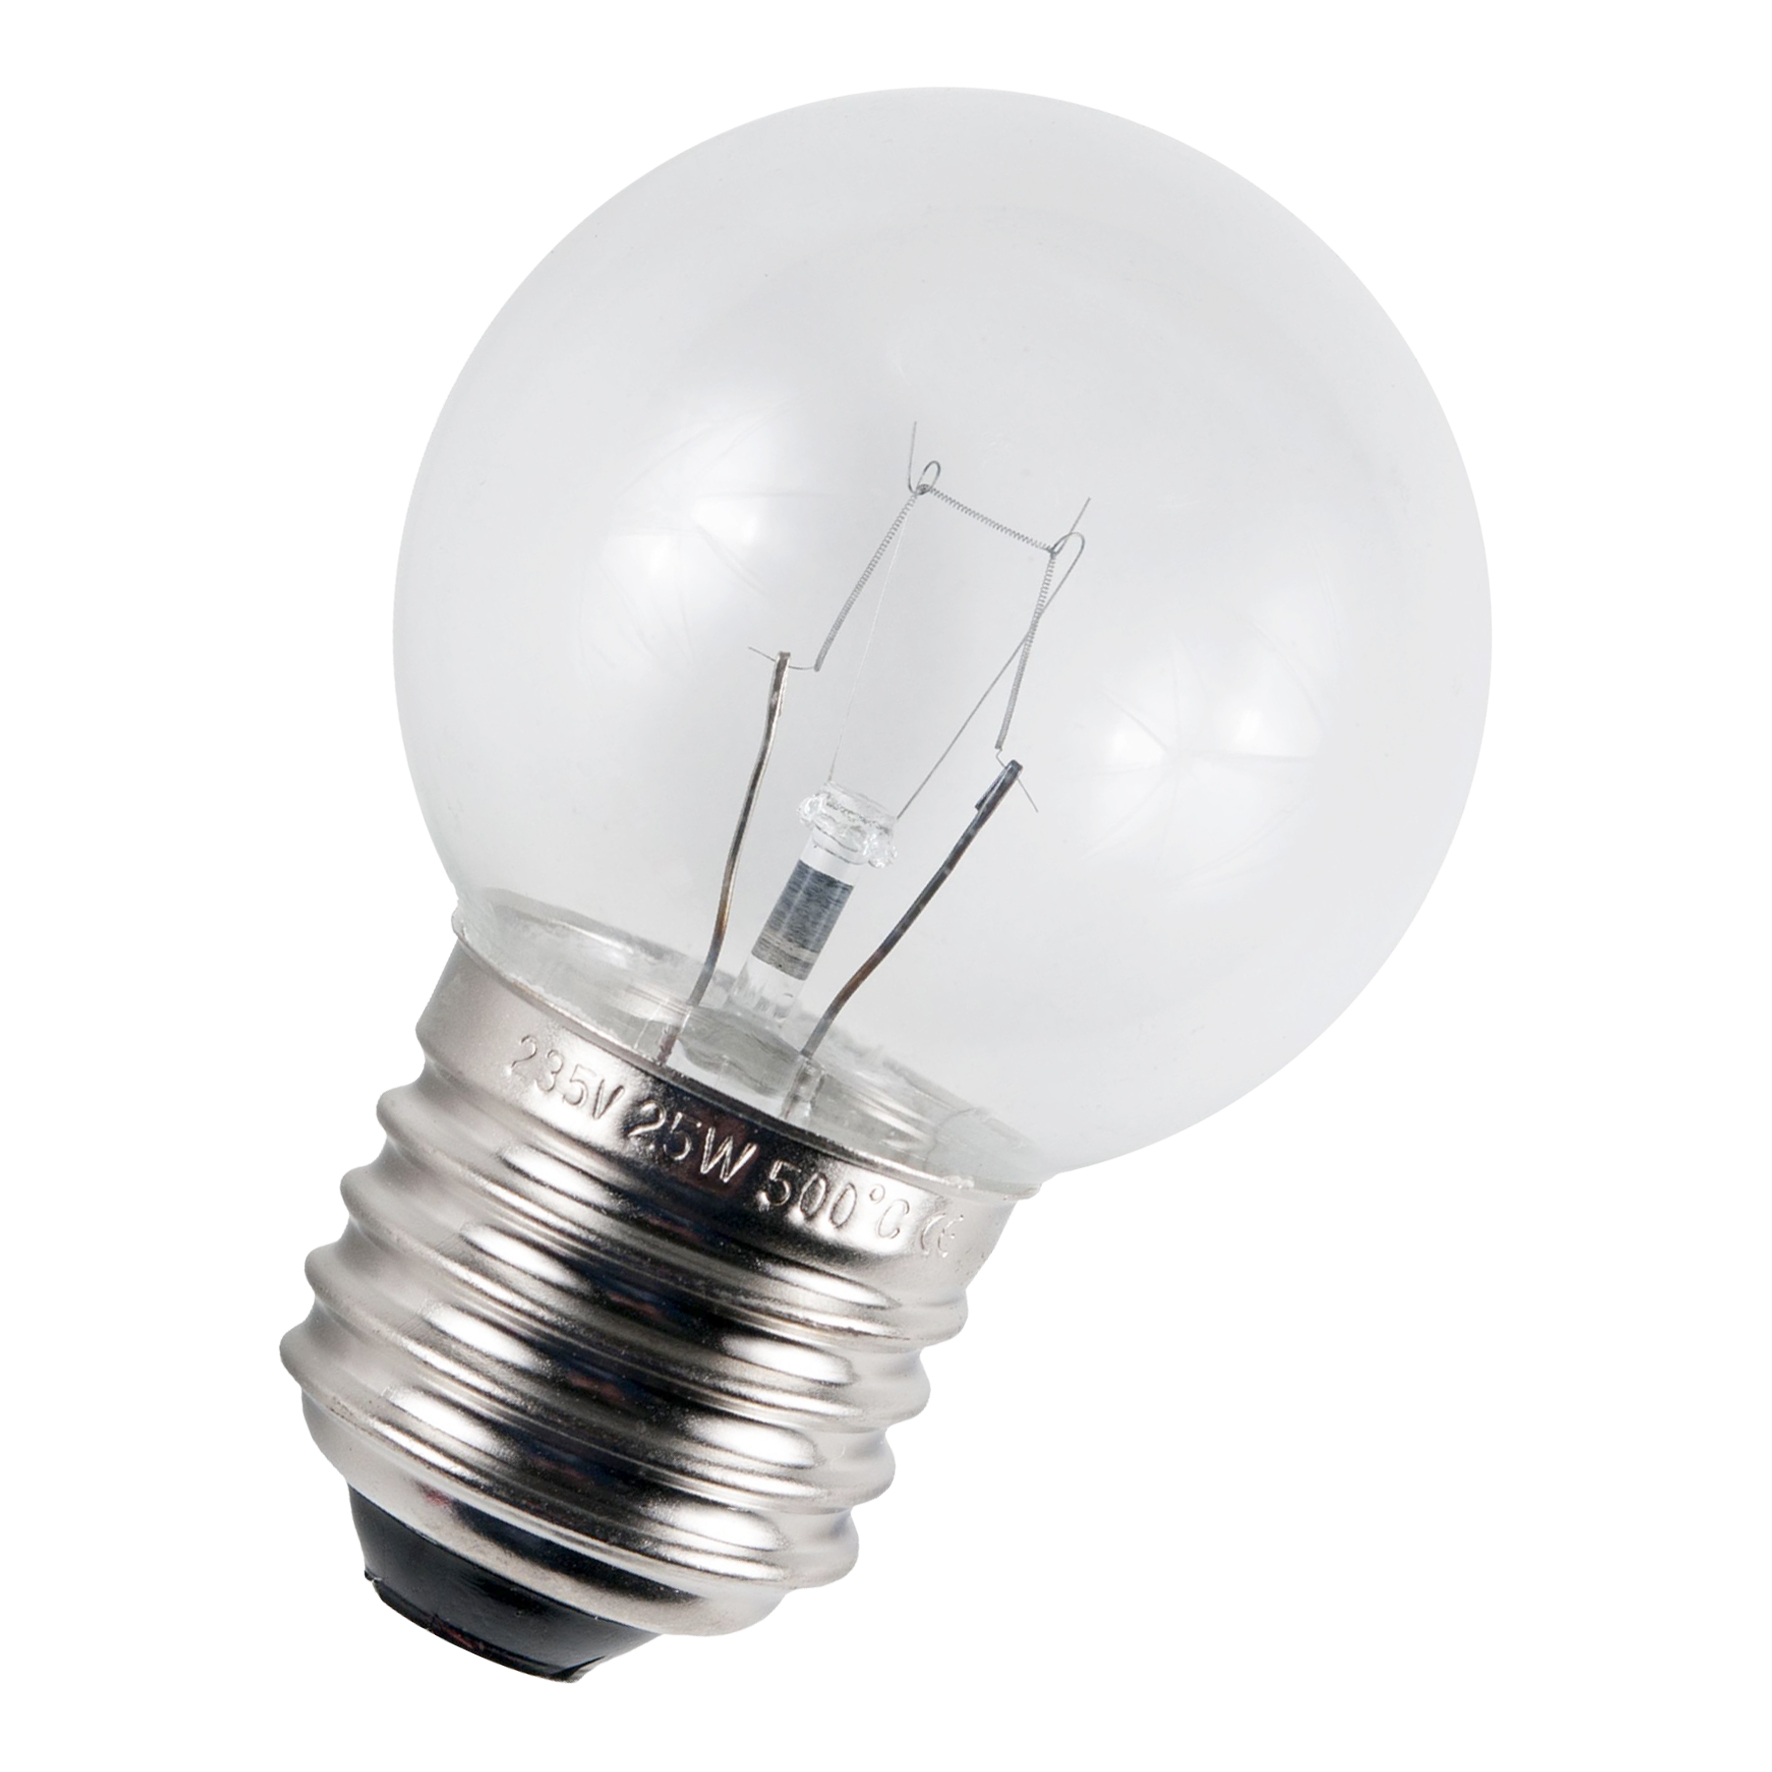 05994100030751 - e-Bailey incandescent lamp Bailey - - Lamps | Sphere-shaped